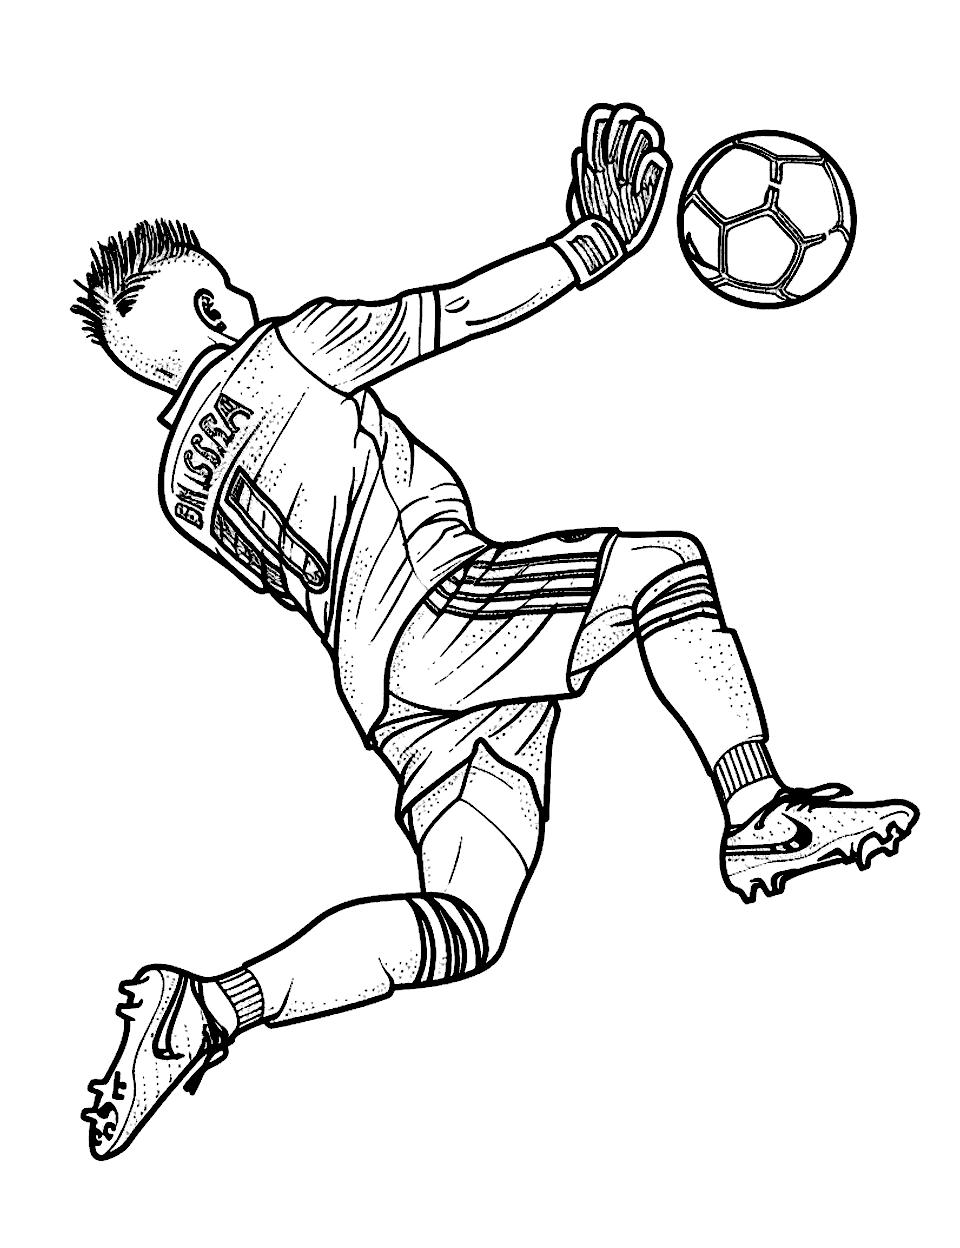 Goalkeeper Jumping for a Save Soccer Coloring Page - A goalkeeper in mid-air, stretching to catch the ball during a game.